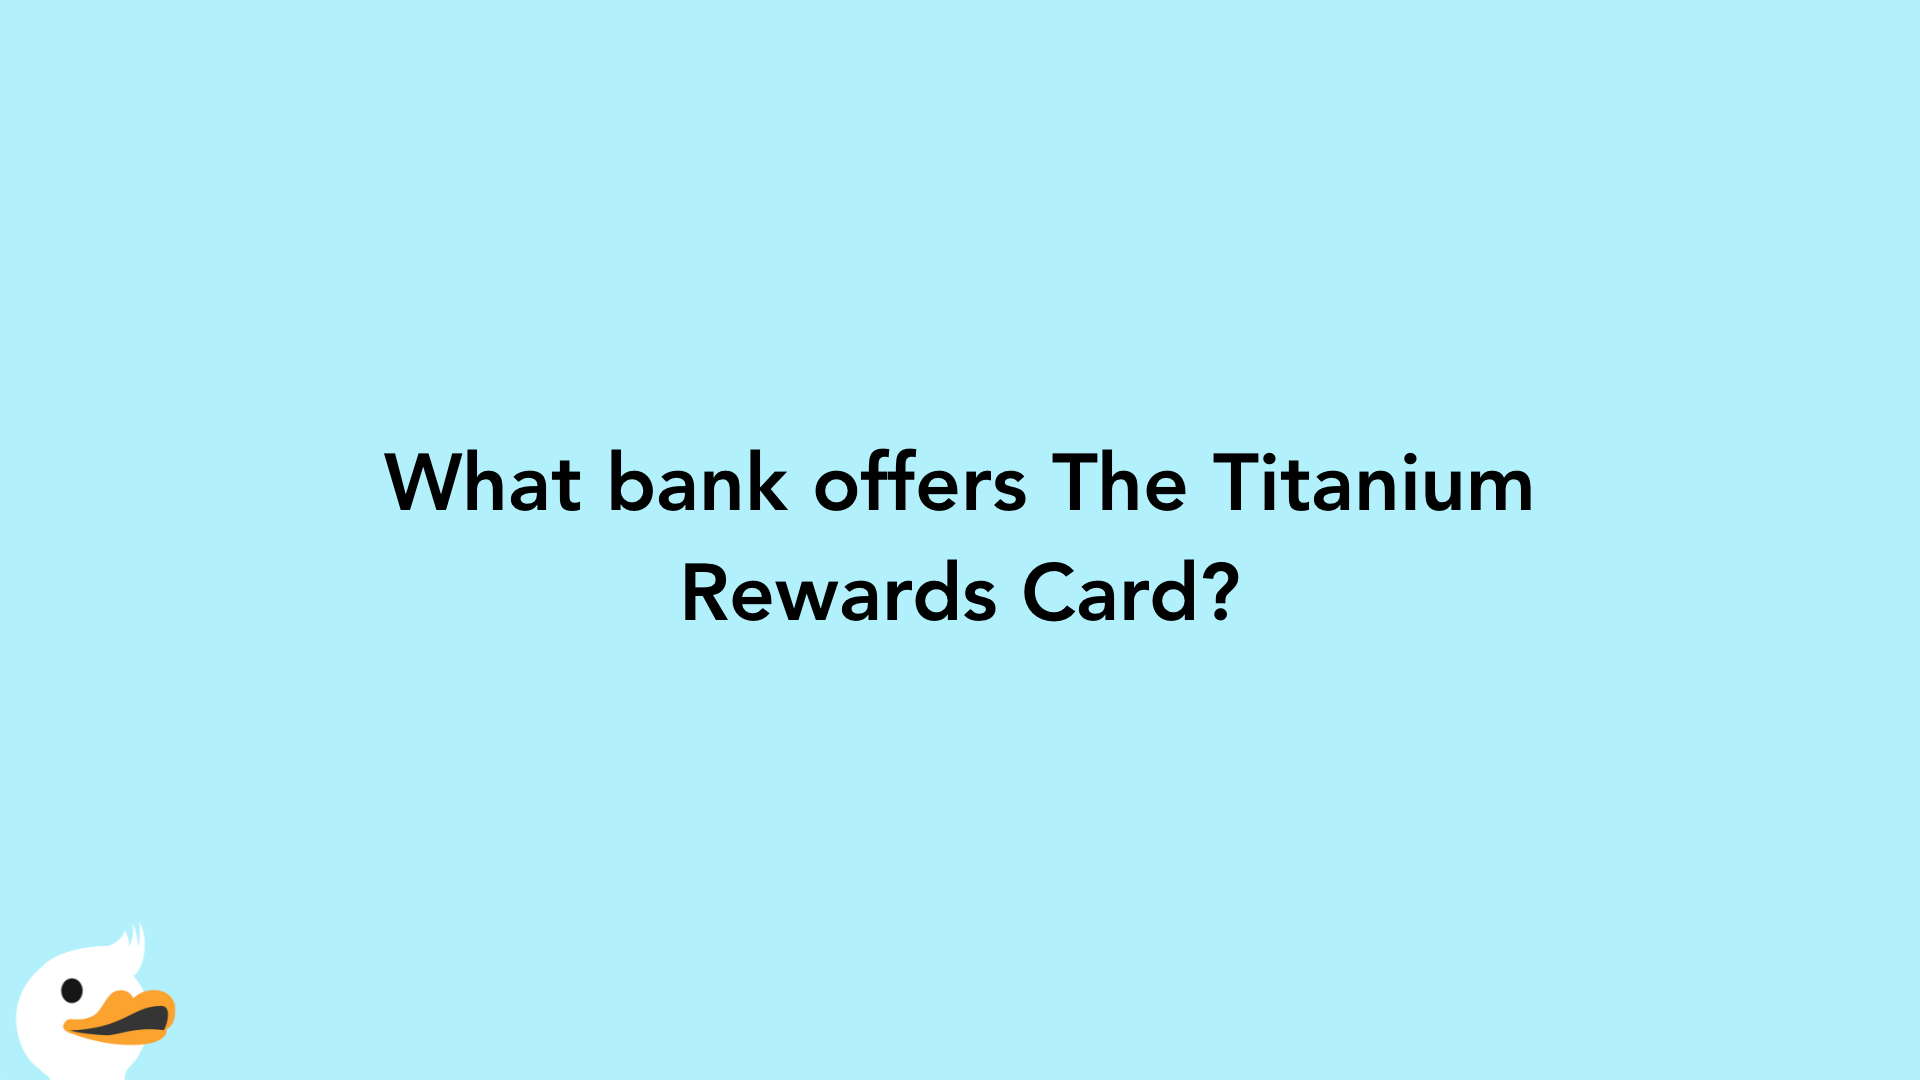 What bank offers The Titanium Rewards Card?